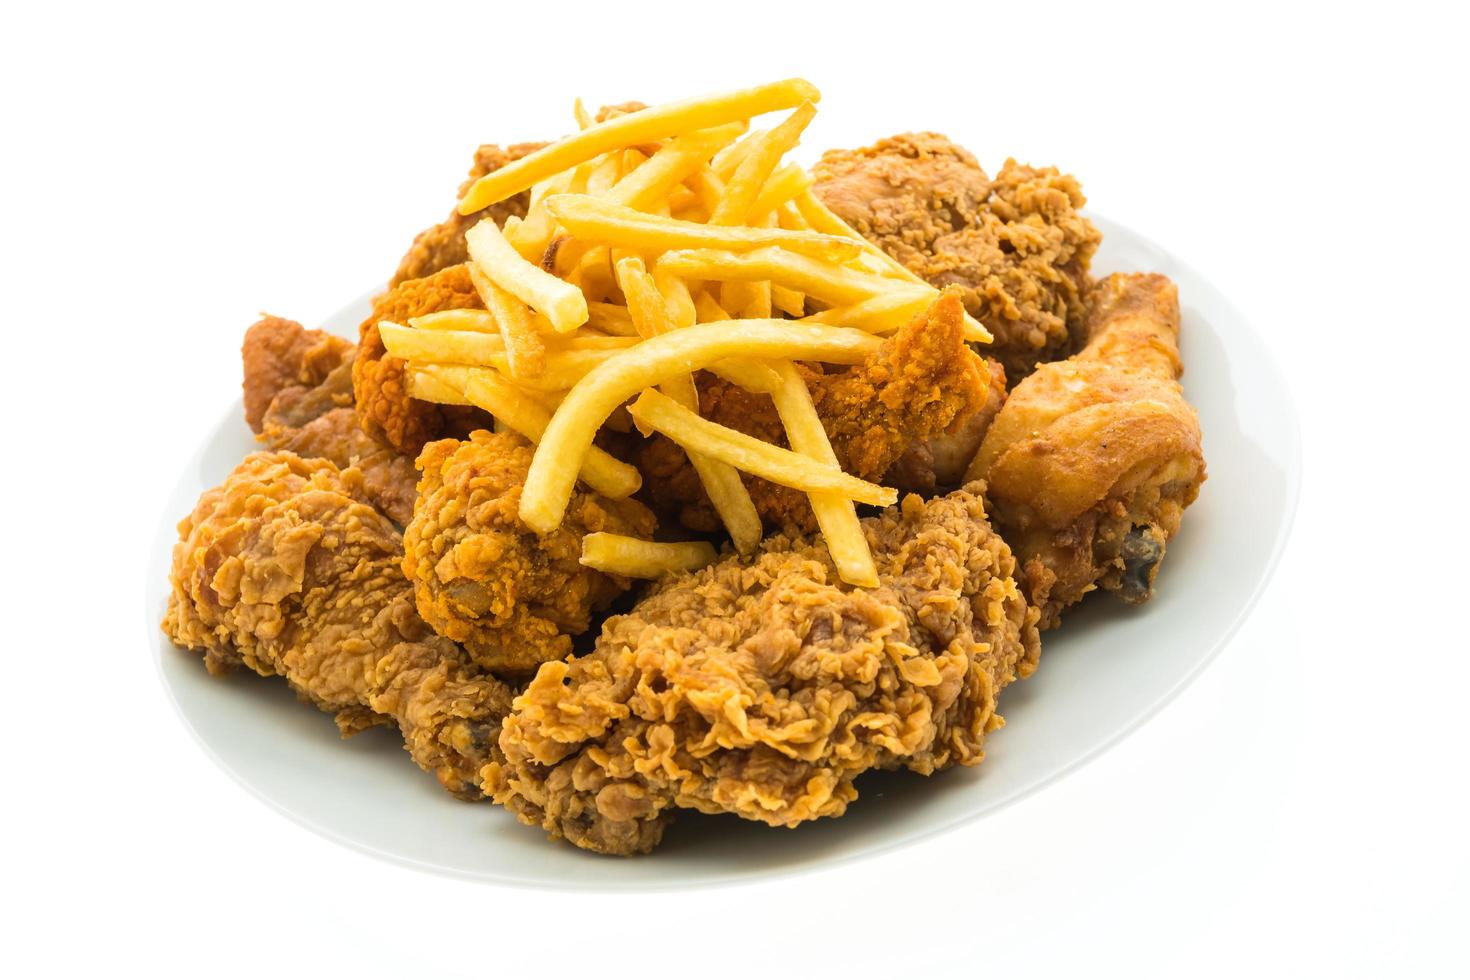 Fried chicken and french fries on a white plate photo